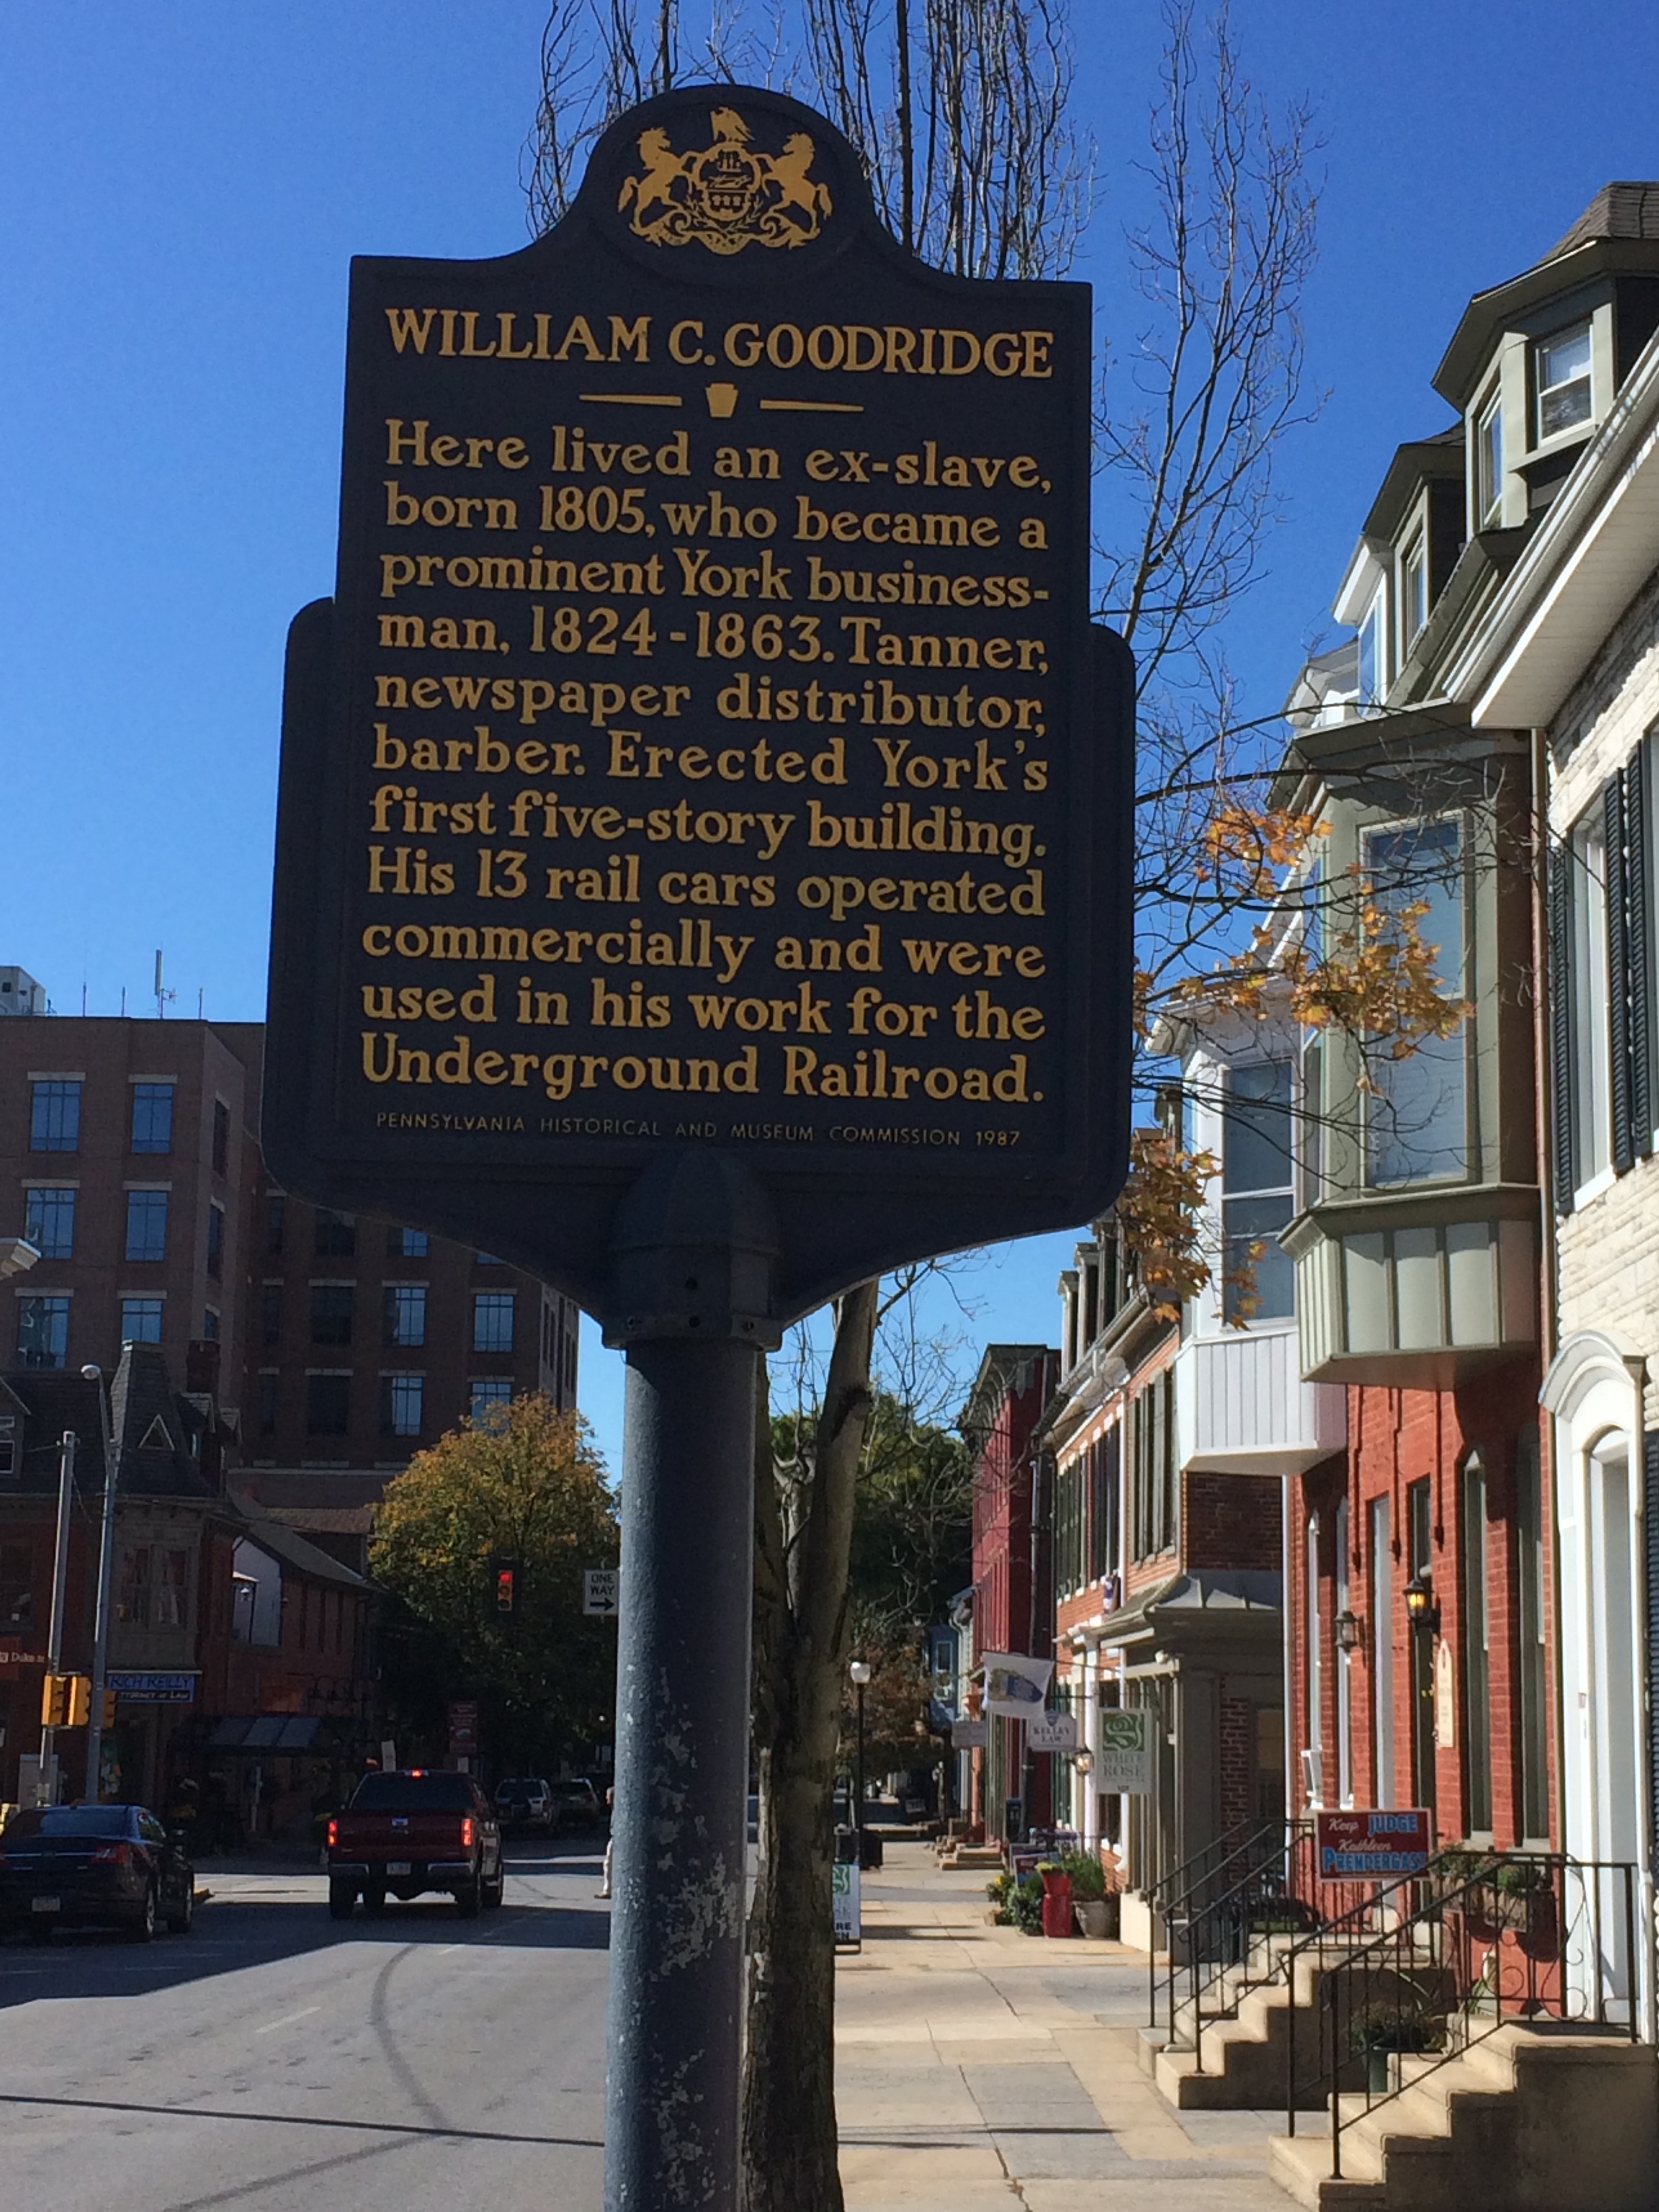 This photo shows the tall, metal blue and gold marker for William C. Goodridge.